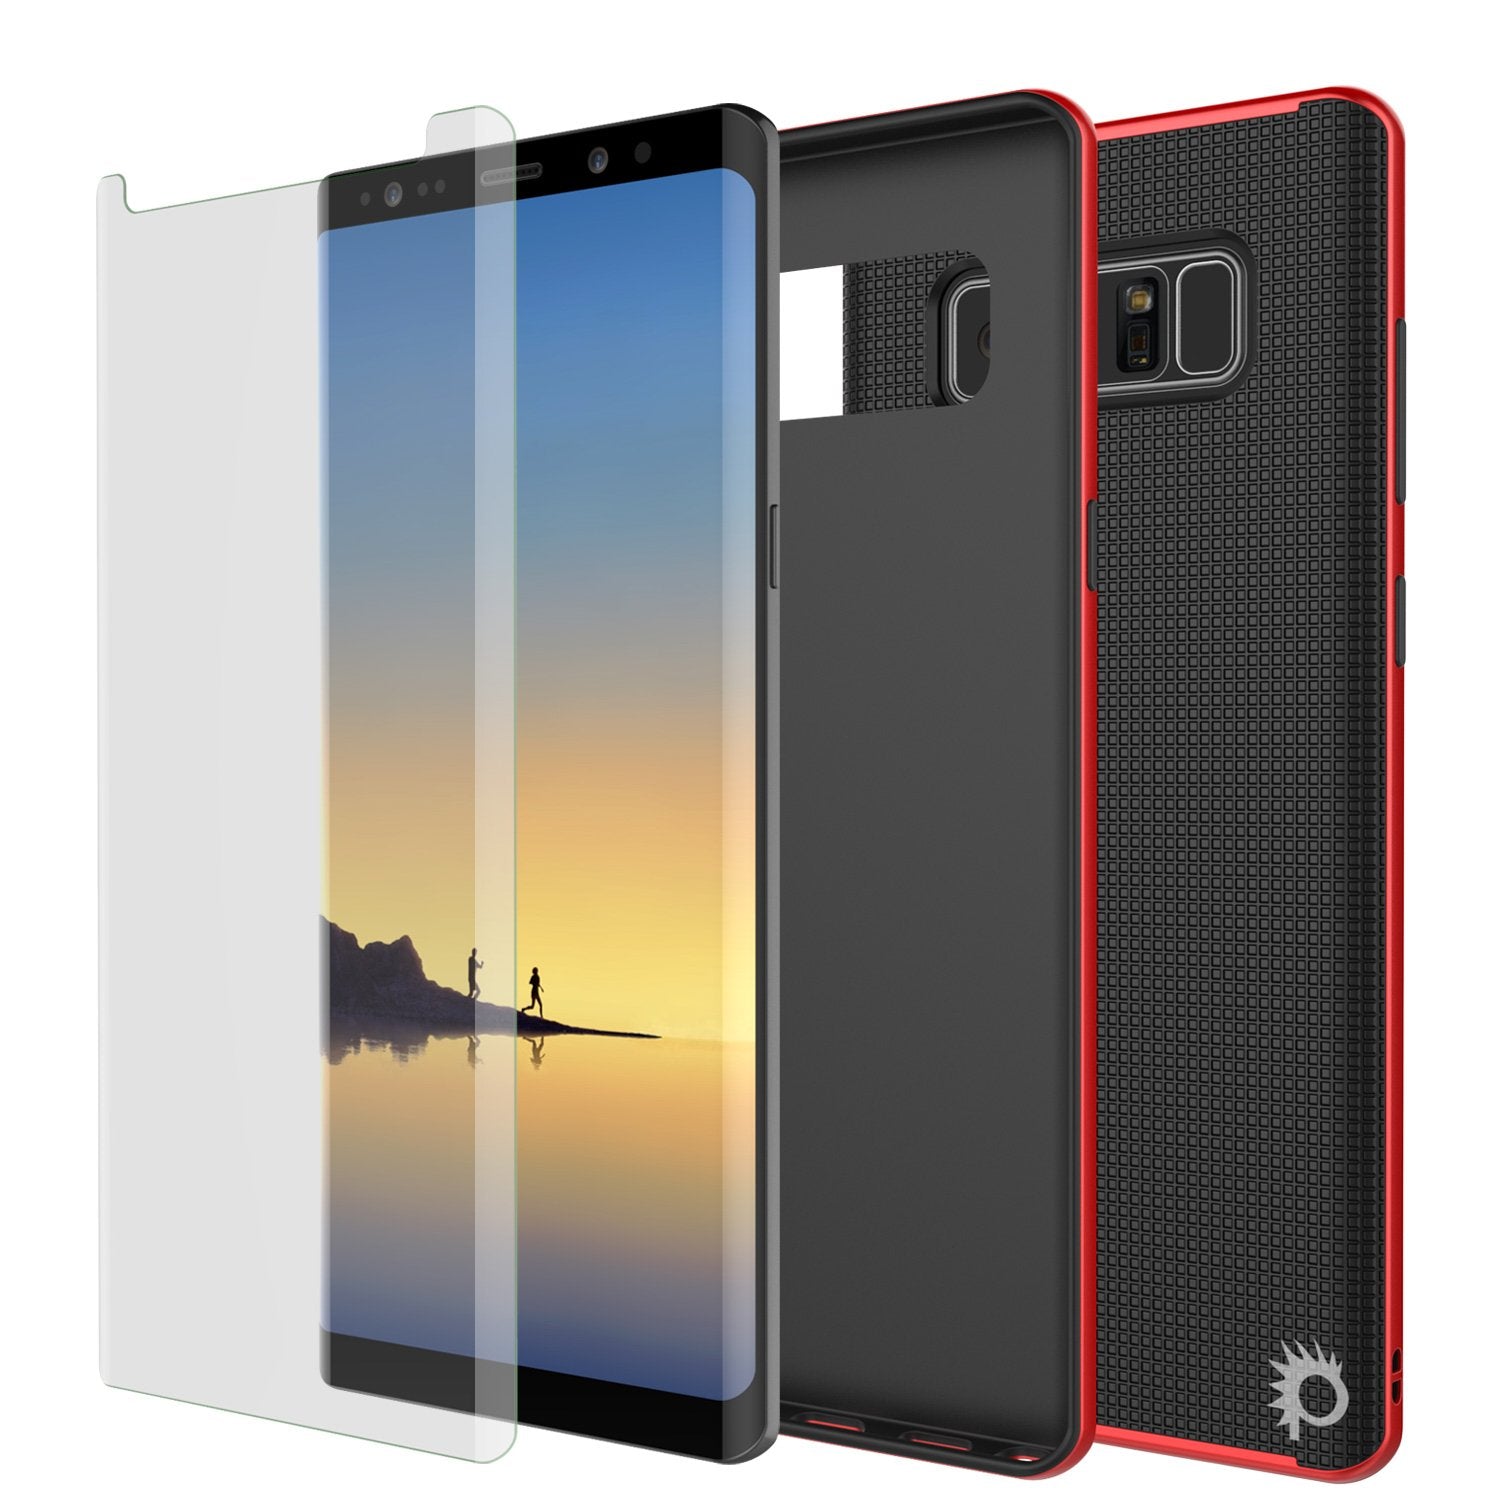 Galaxy Note 8 Case, PunkCase [Stealth Series] Hybrid 3-Piece Shockproof Dual Layer Cover [Non-Slip] [Soft TPU + PC Bumper] with PUNKSHIELD Screen Protector for Samsung Note 8 [Red] - PunkCase NZ